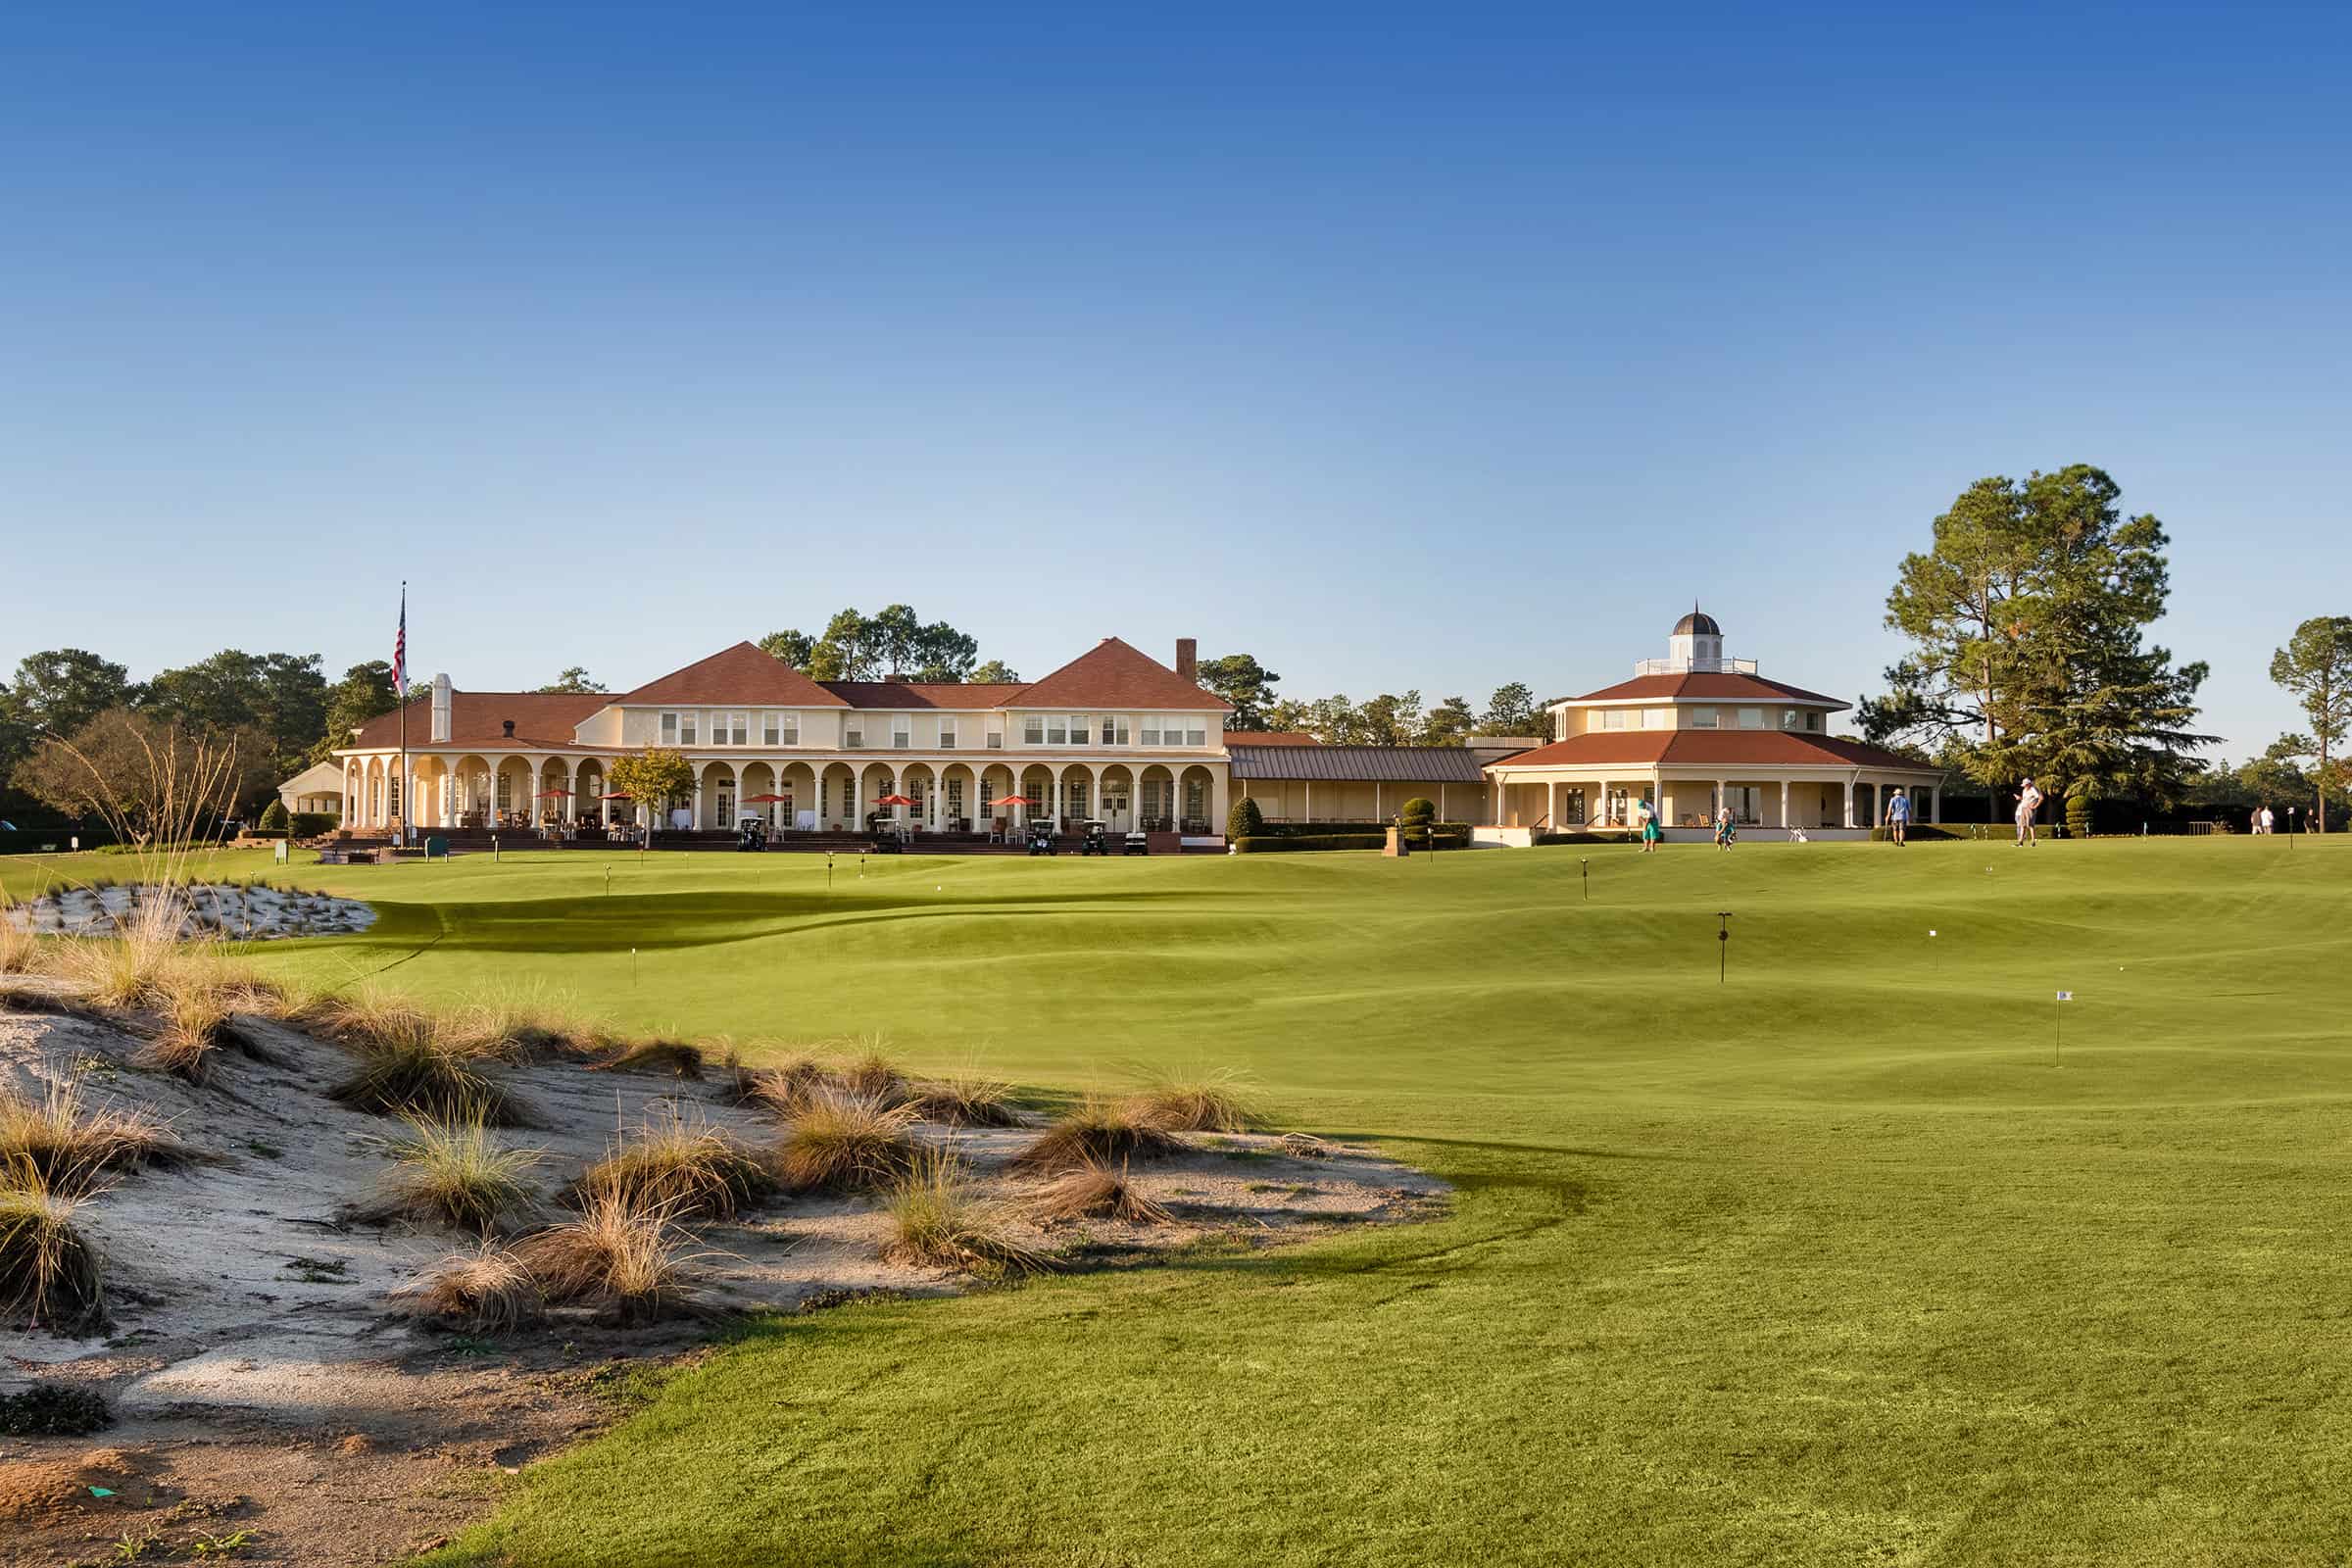 Thistle Dhu Golf Putting Course with 18 putting holes at Pinehurst Golf Resort